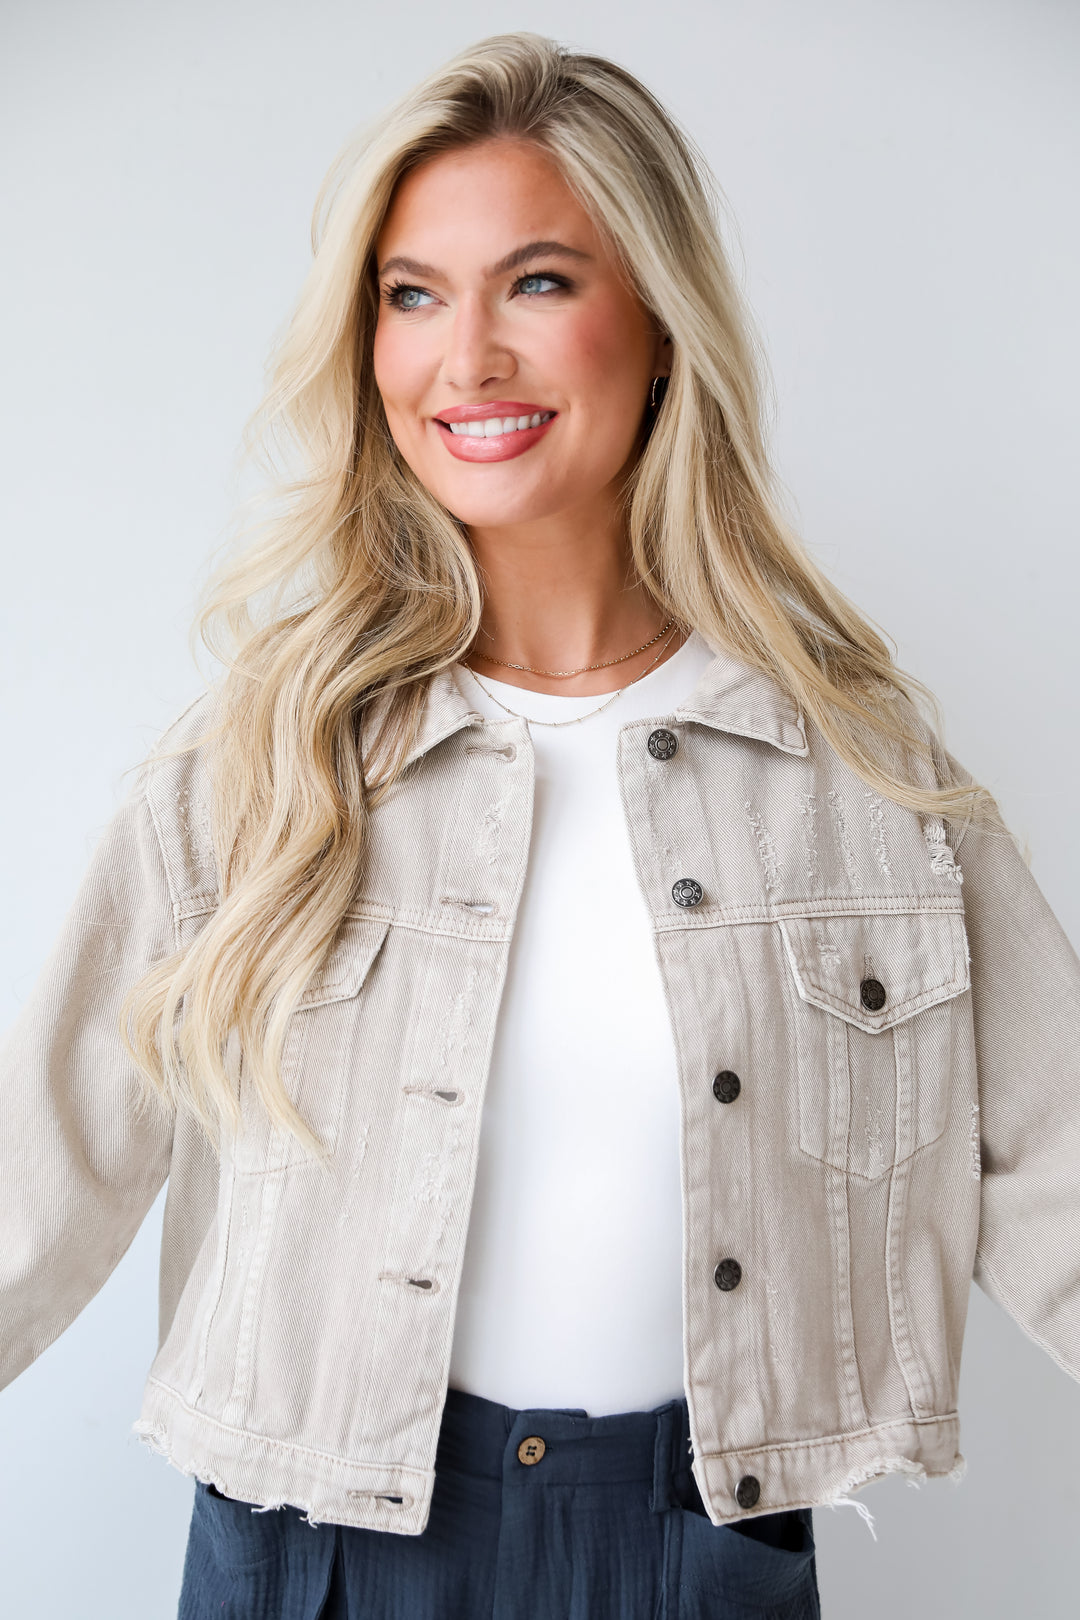 Taupe Distressed Cropped Denim JacketDefinite Icon Taupe Distressed Cropped Denim Jacket is lighweight, mid-crop fit, and the perfect spring layer. Taupe jacket. spring jacket.